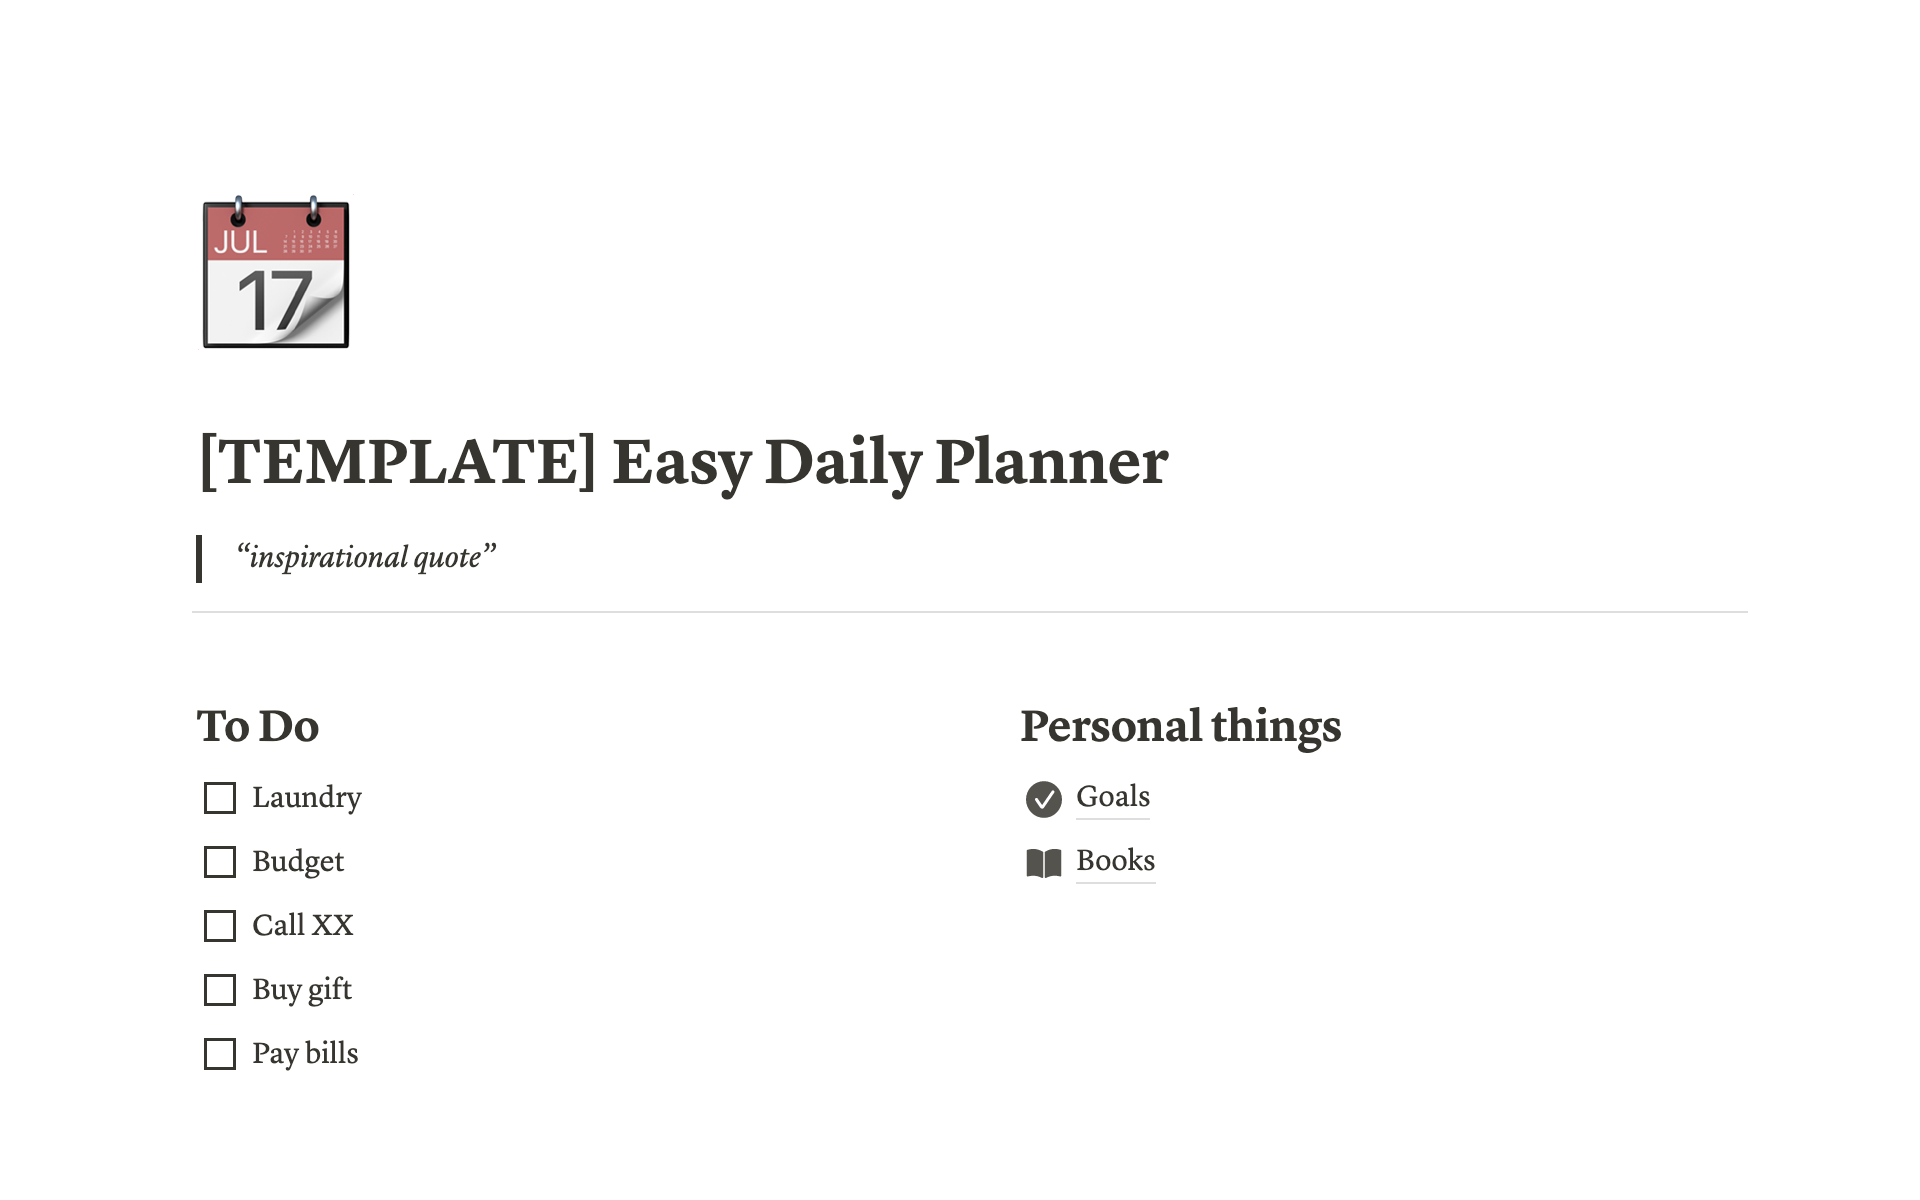 Plan your daily life easily!